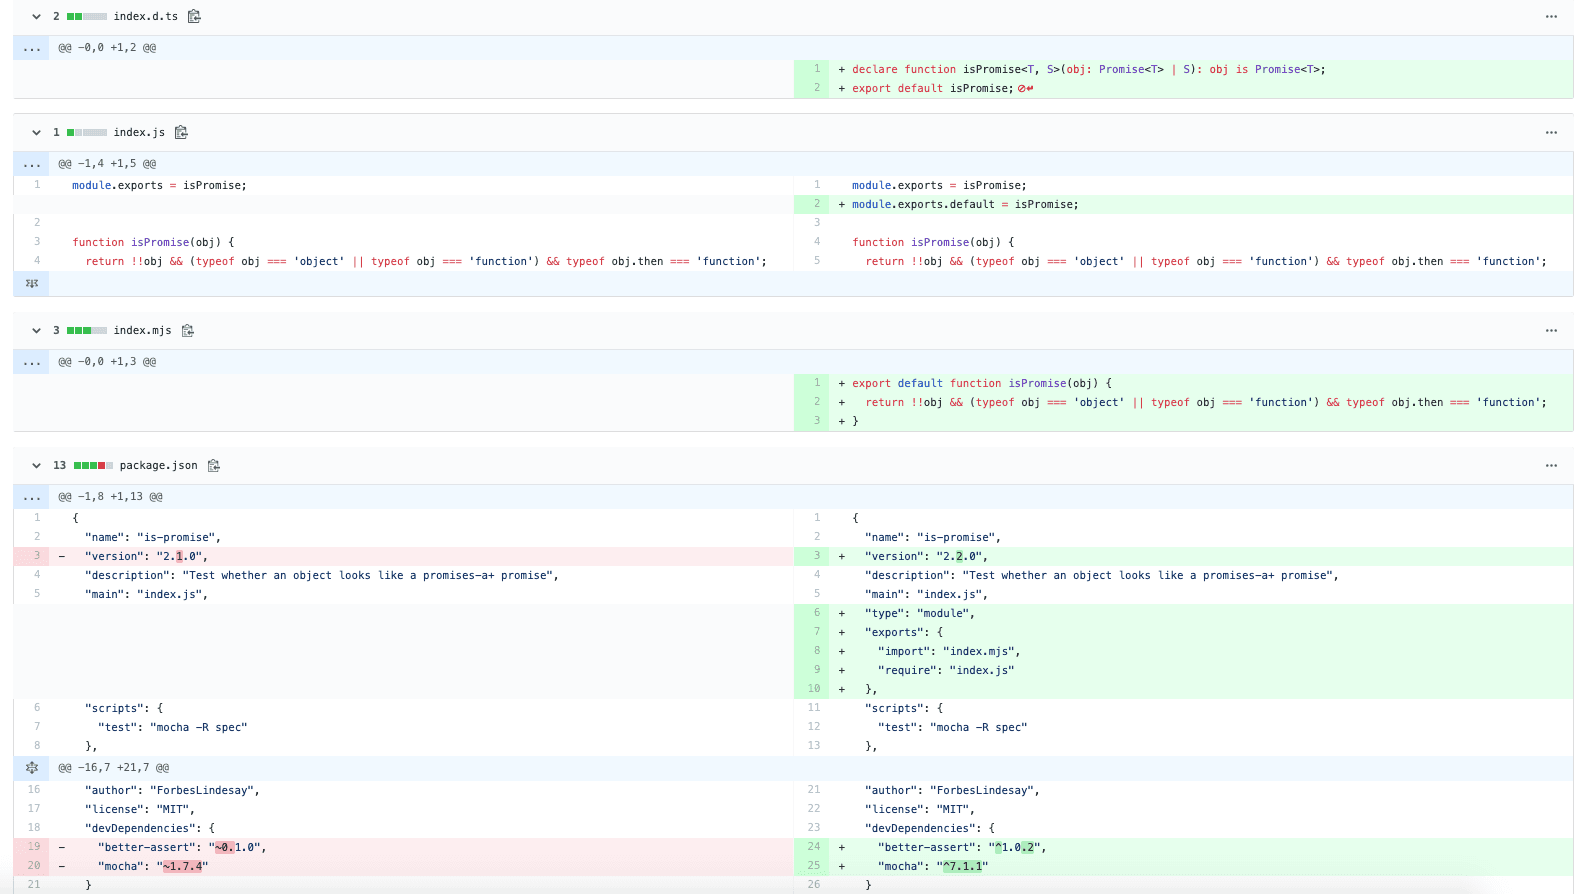 is-promise-git-compare